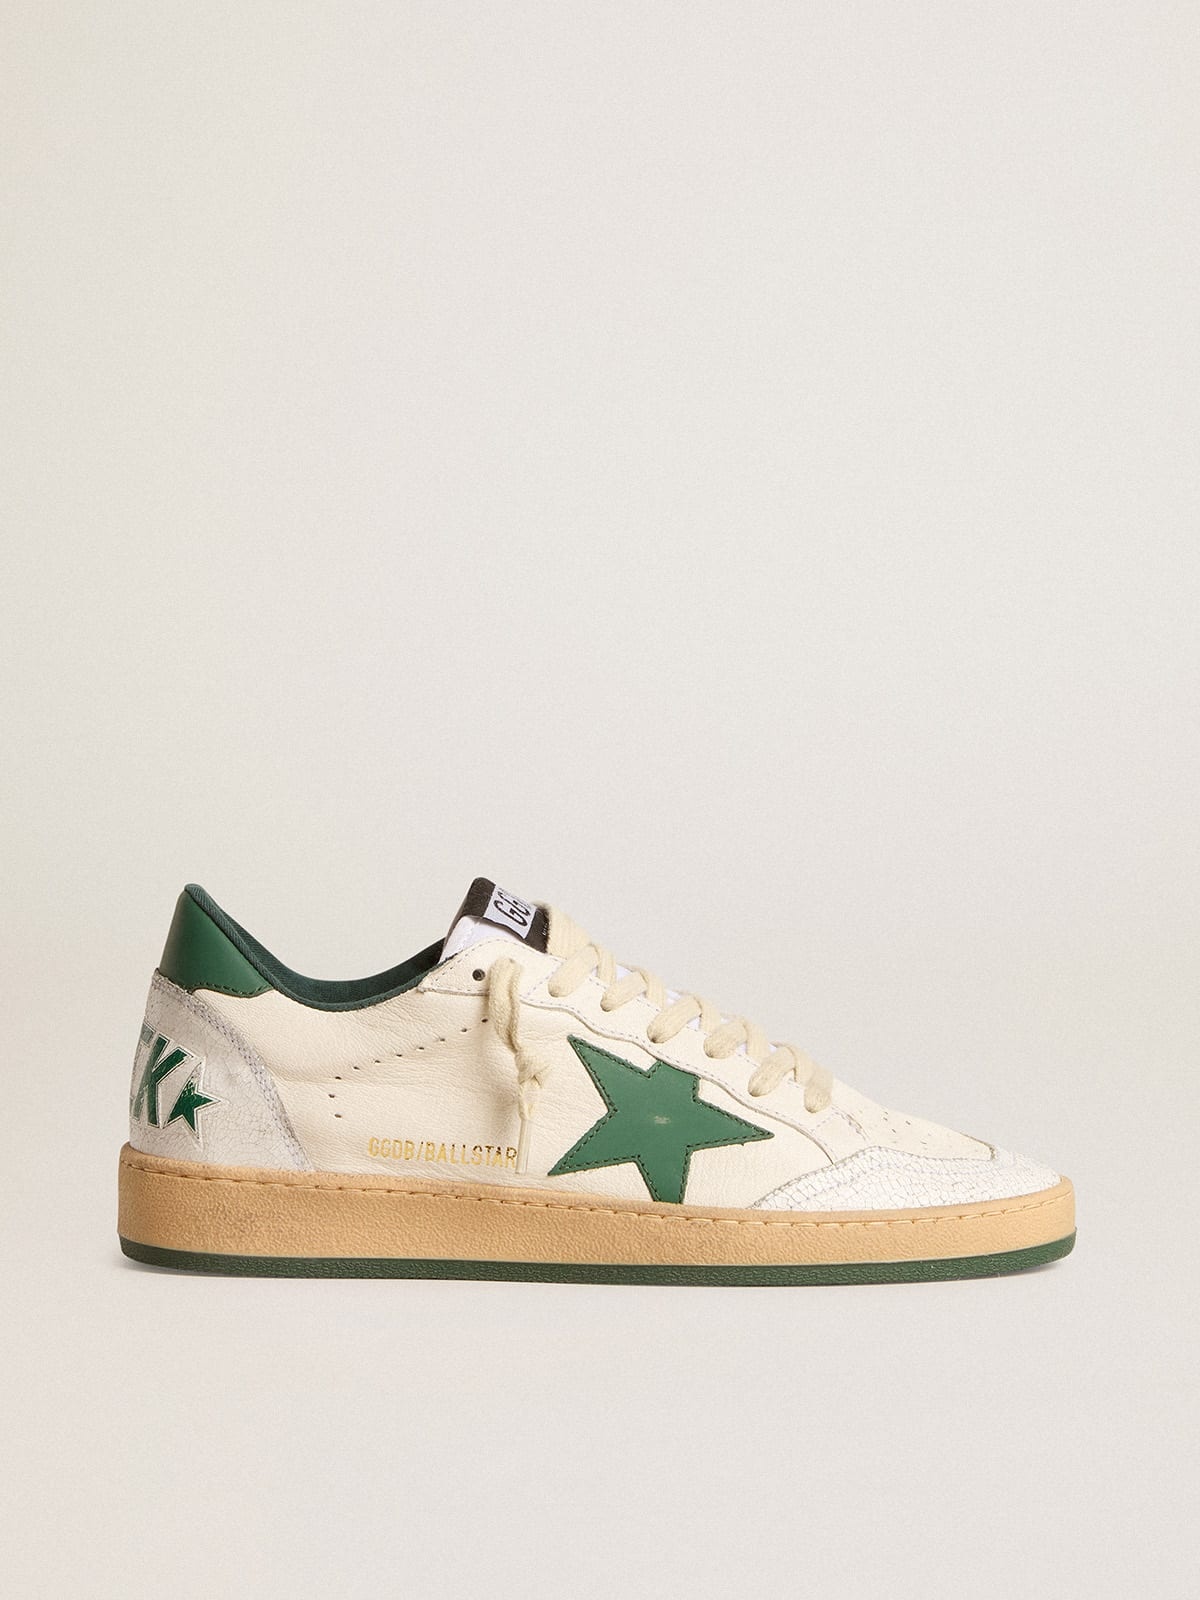 Men's Ball Star Wishes in white nappa leather with green leather star and heel tab - 1